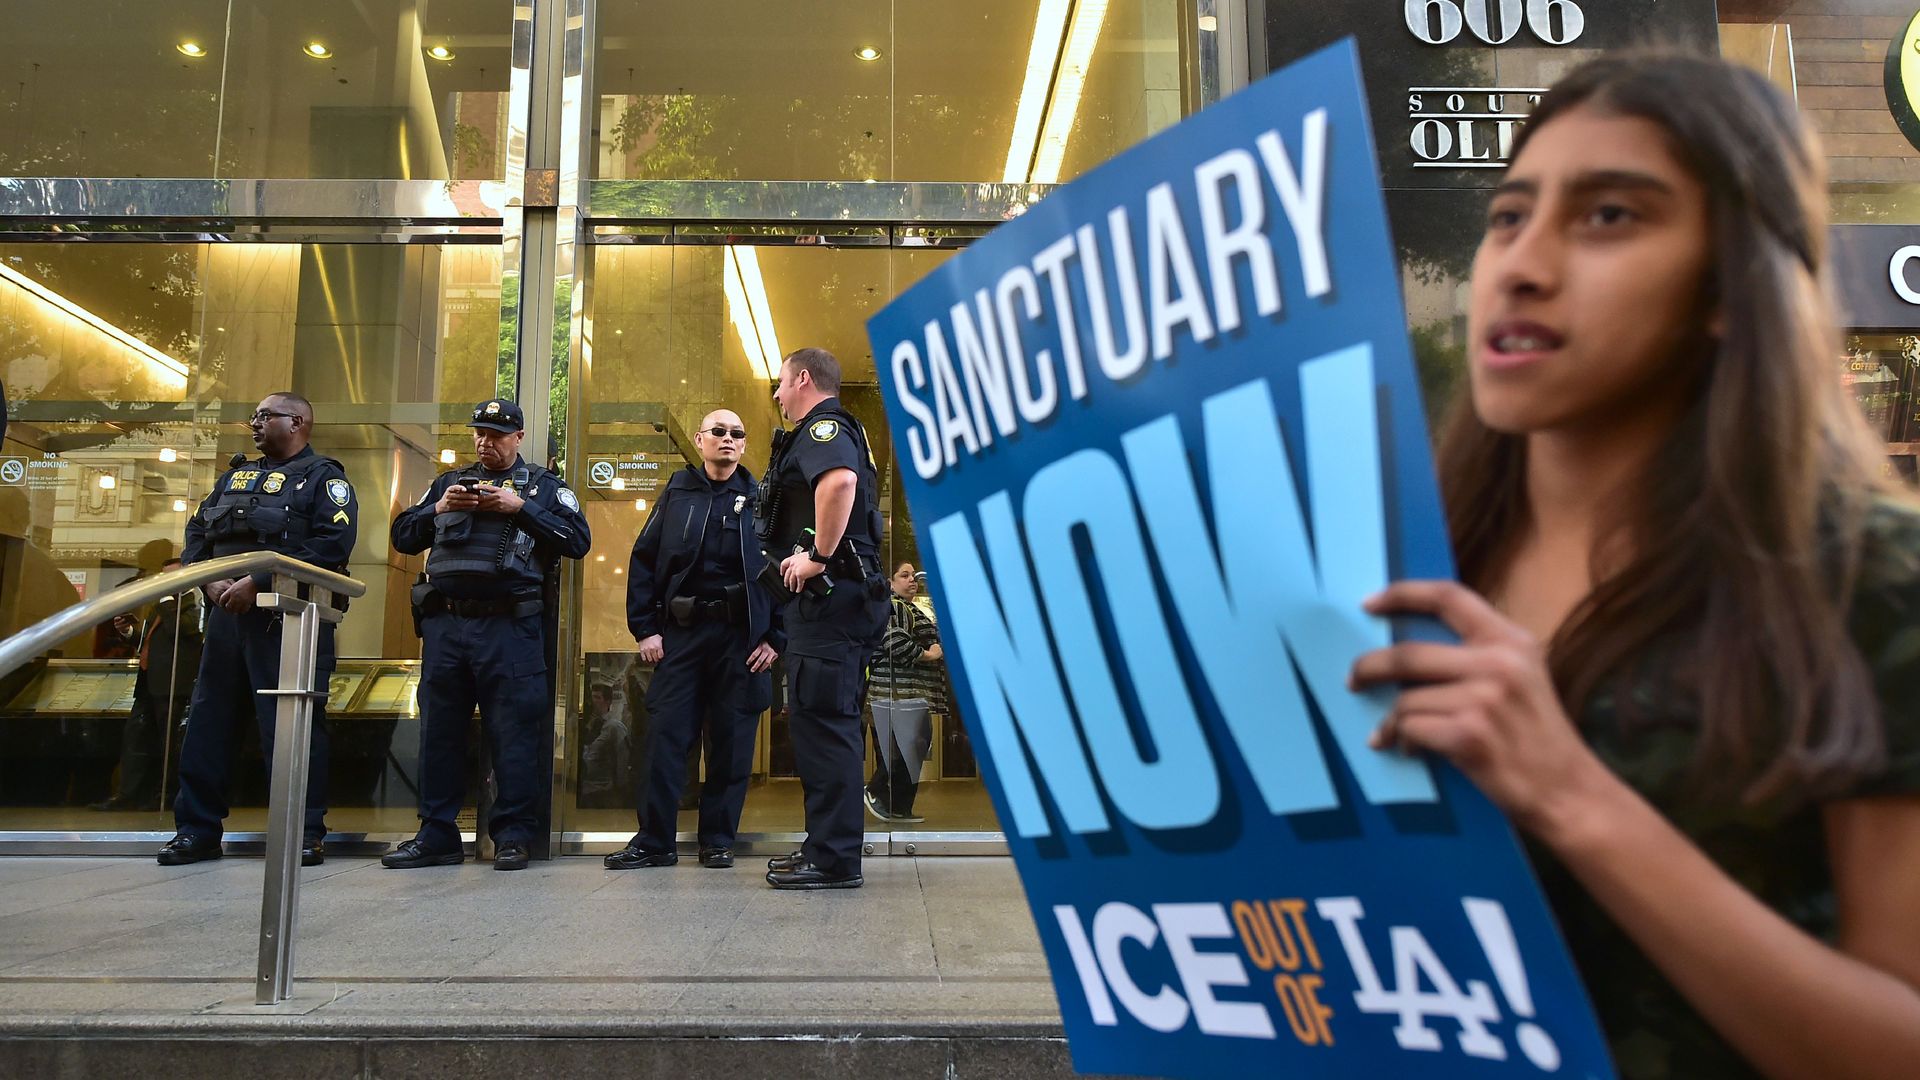 Department of Homeland Security police officers stand guard in front of a Los Angeles Immigration Court building during a rally against an arrest by ICE agents. 